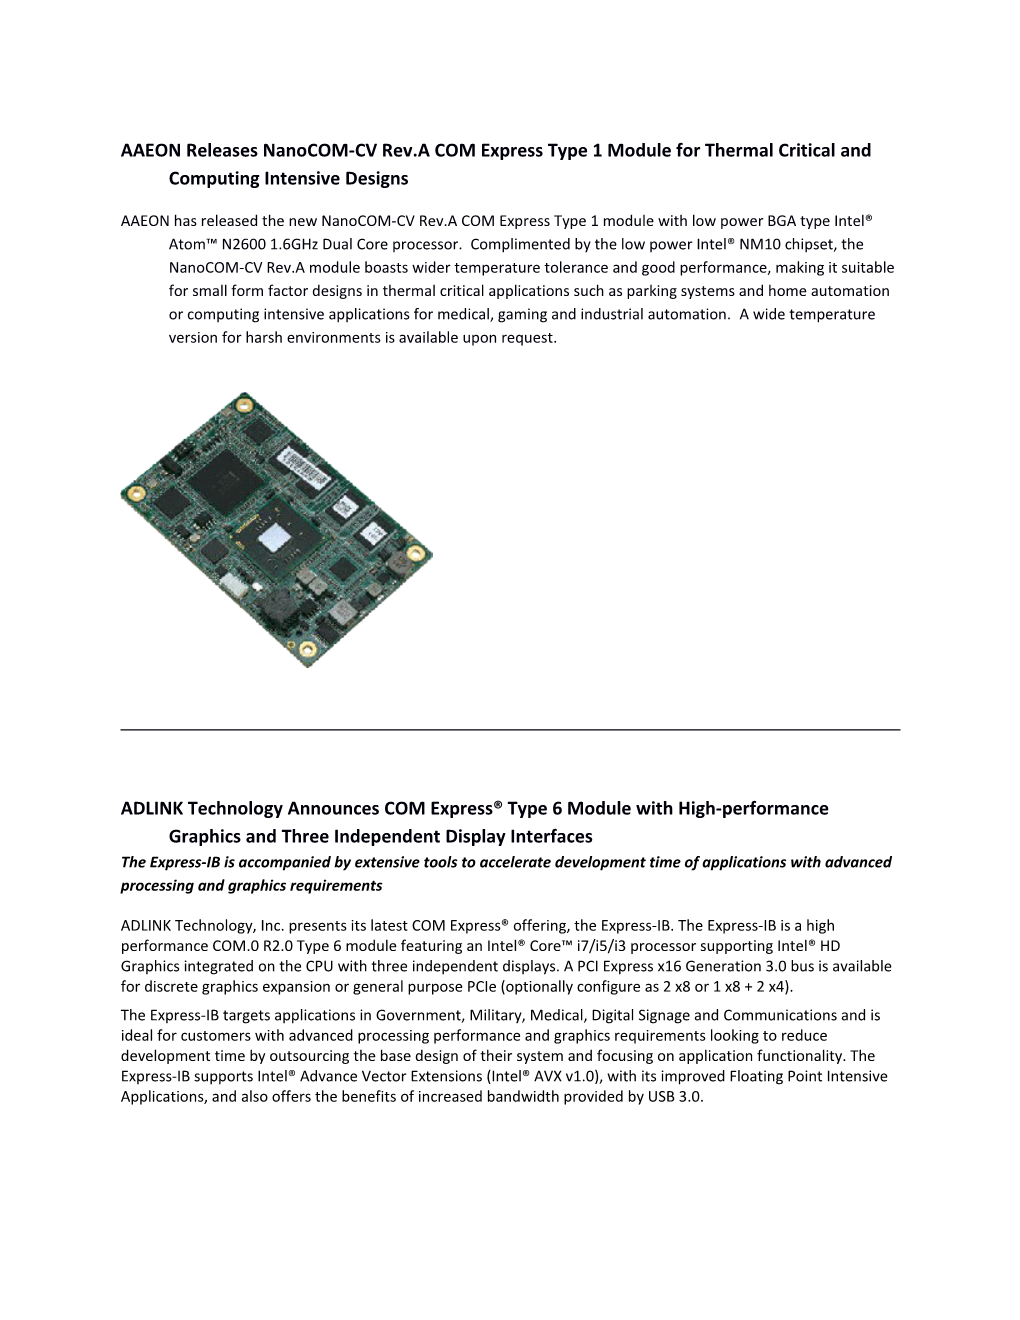 AAEON Releases Nanocom-CV Rev.A COM Express Type 1 Module for Thermal Critical and Computing